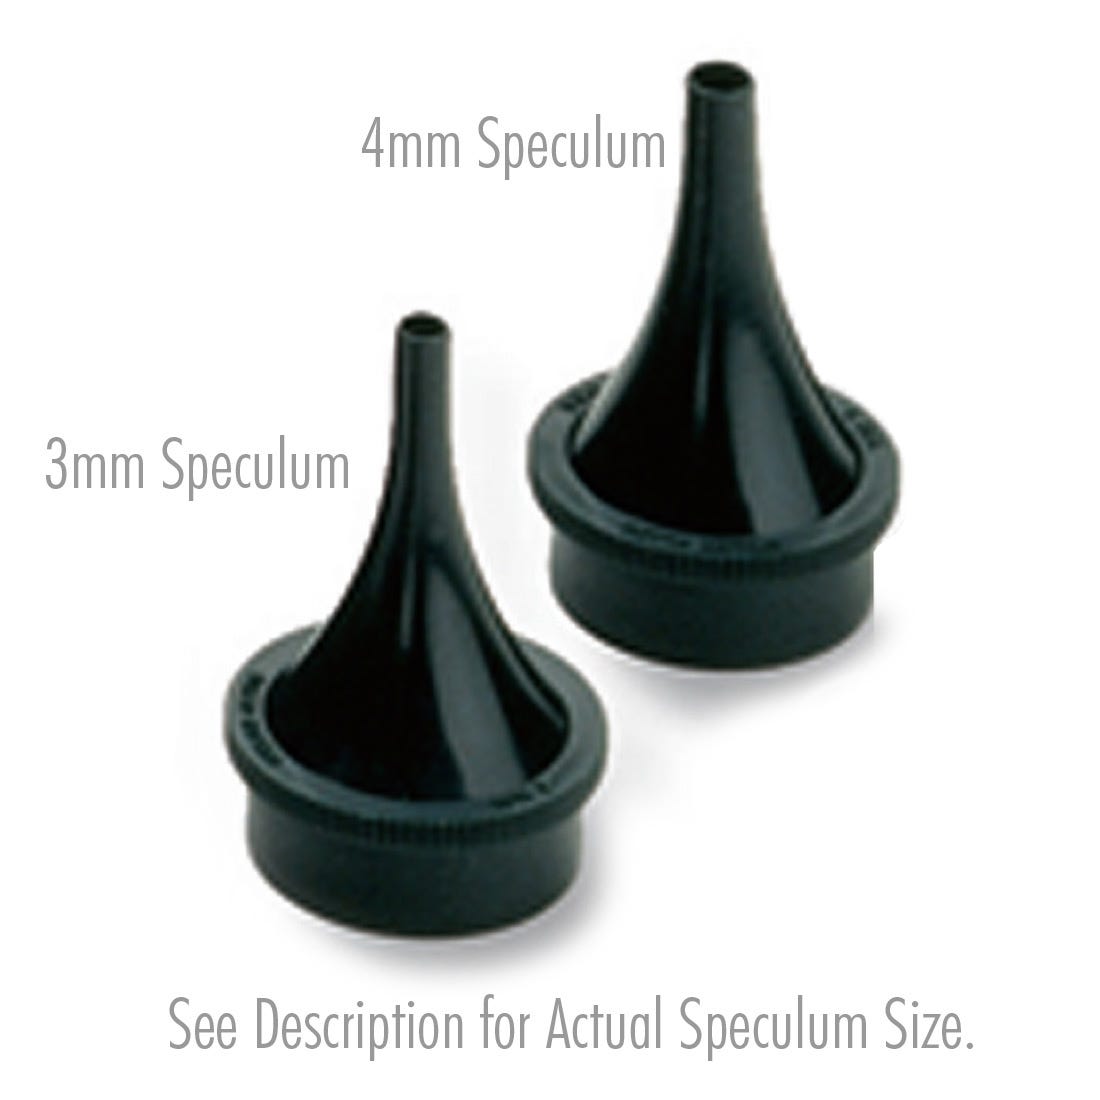 Otoscope Specula for Pneumatic and Consulting Otoscopes - 4mm Speculum Tip